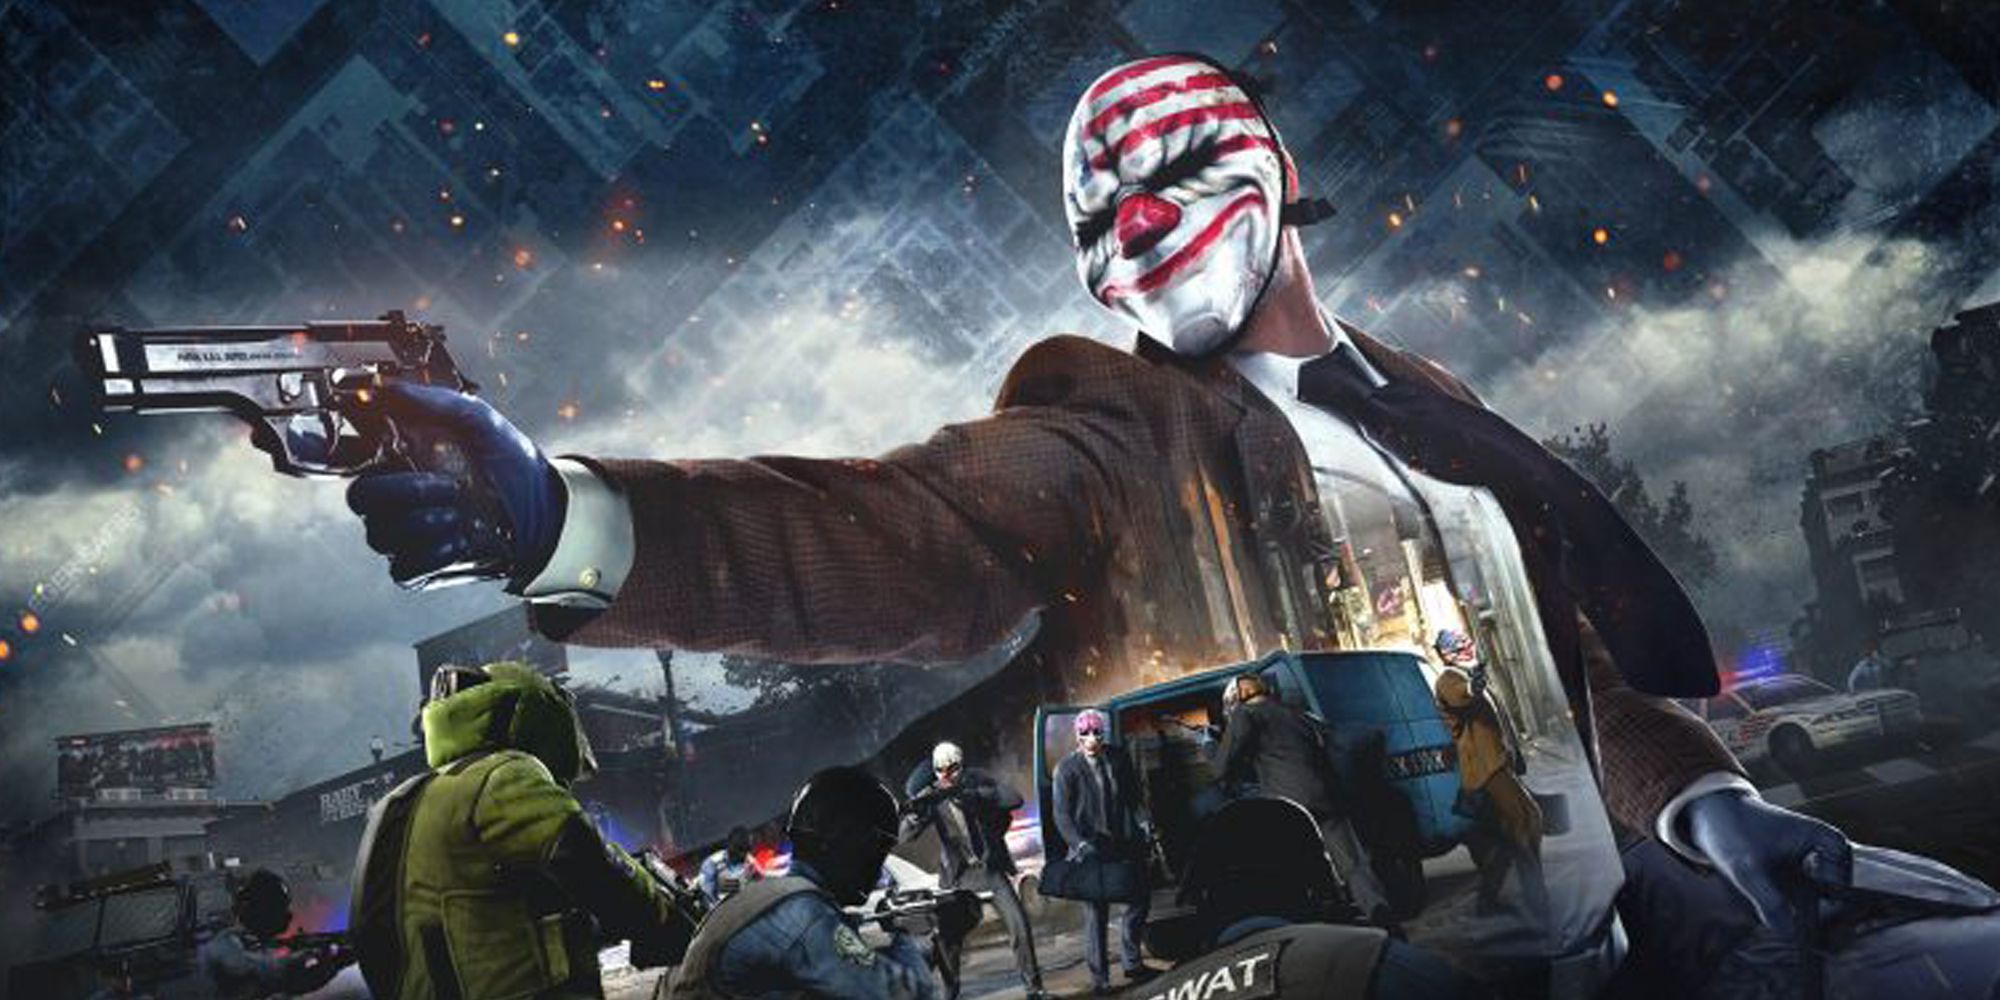 Key art for Payday 2 depicting Dallas holding a gun